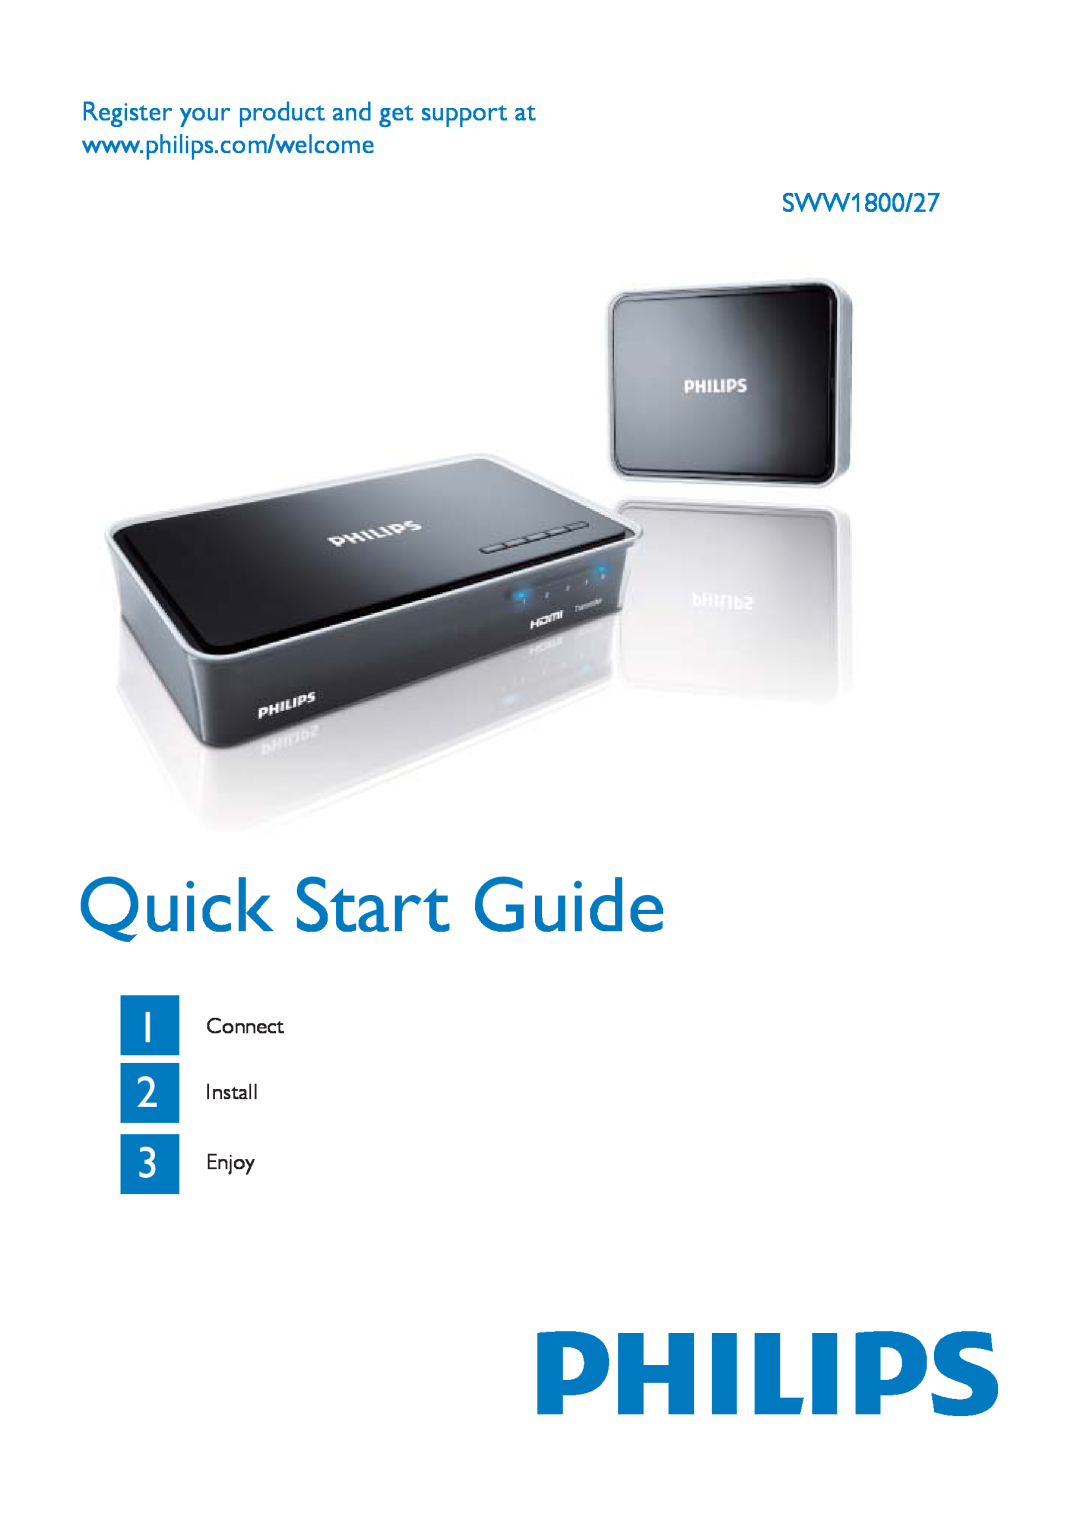 Philips SWW1800/27 quick start Register your product and get support at, Quick Start Guide 